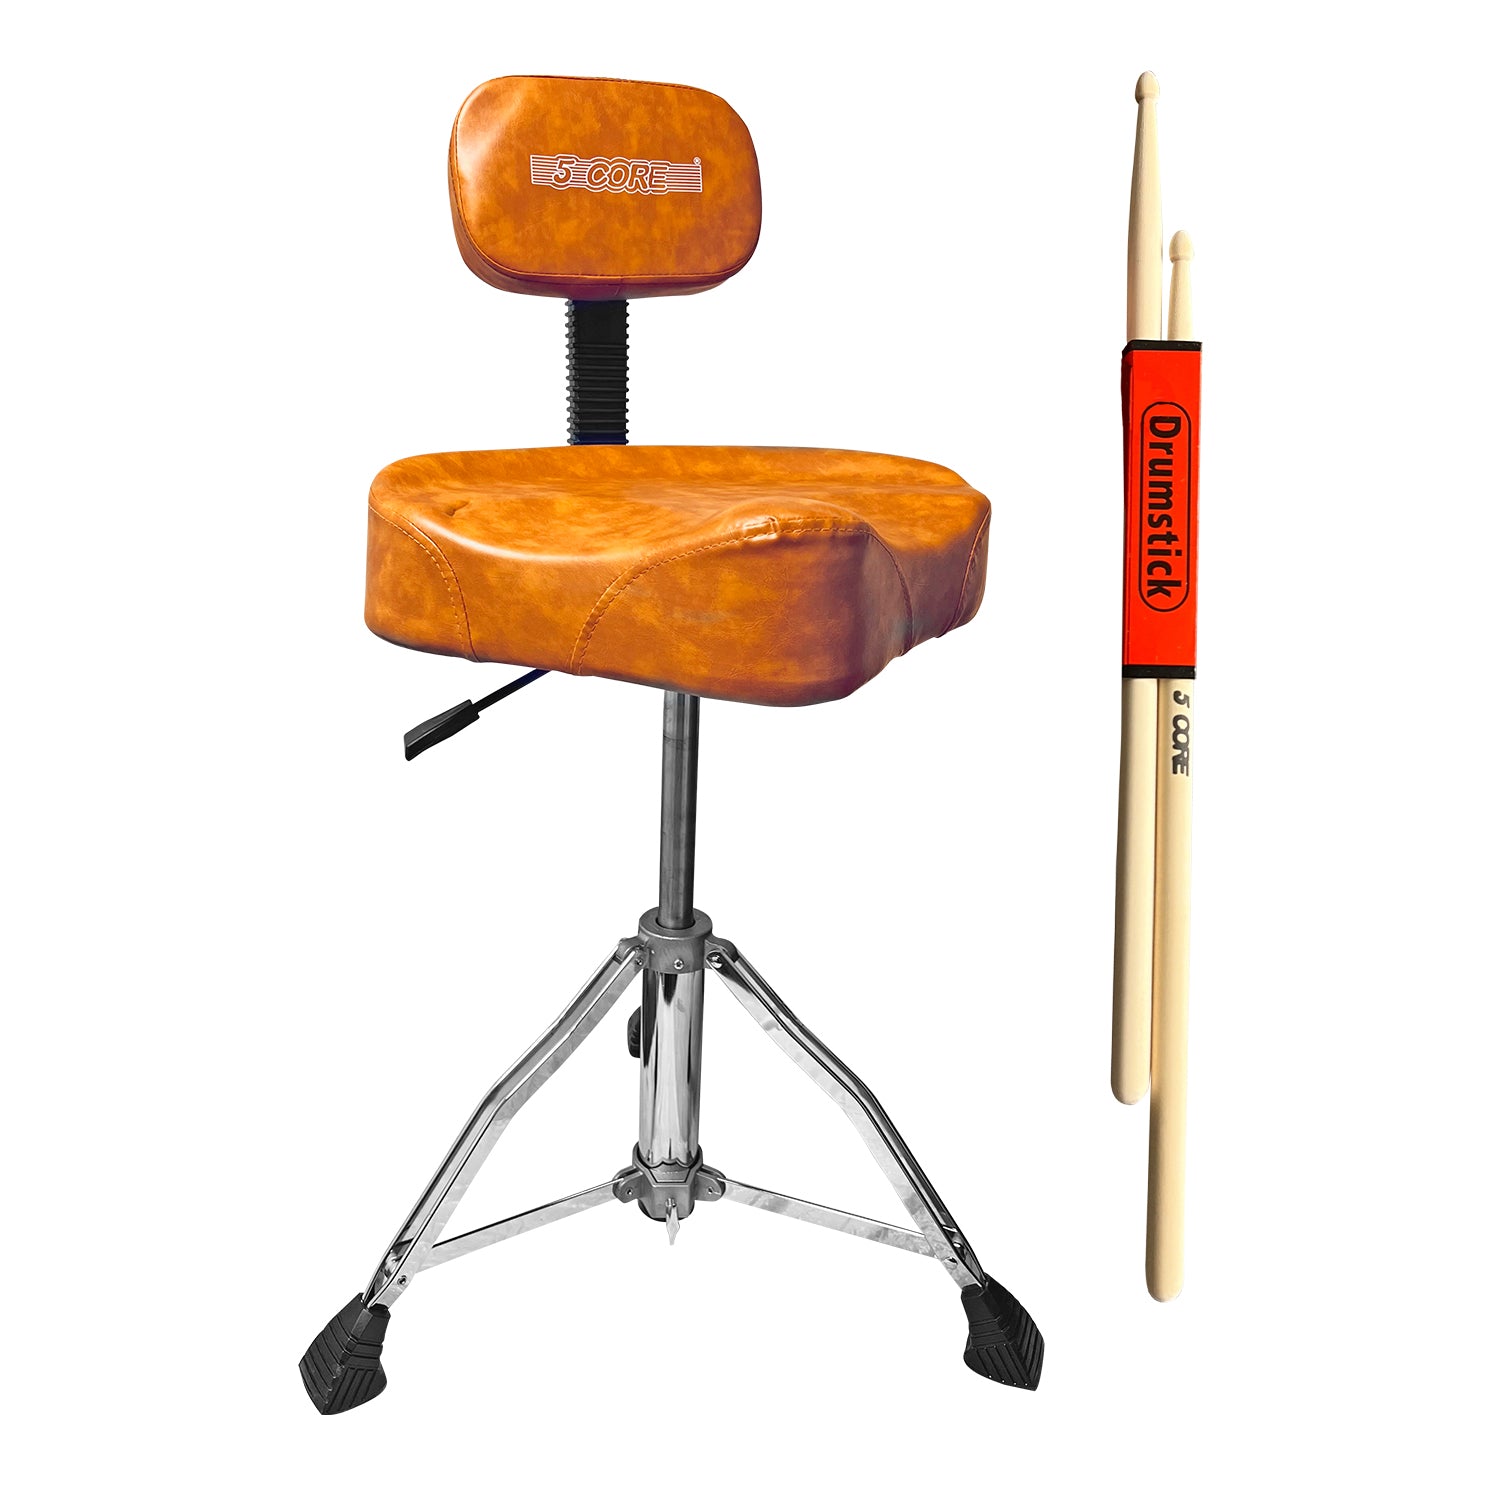 5 CORE Brown Drum Throne with Backrest Hydraulic Adjustable Guitar Chair Thick Memory Foam Motorcycle Style Drum Stool